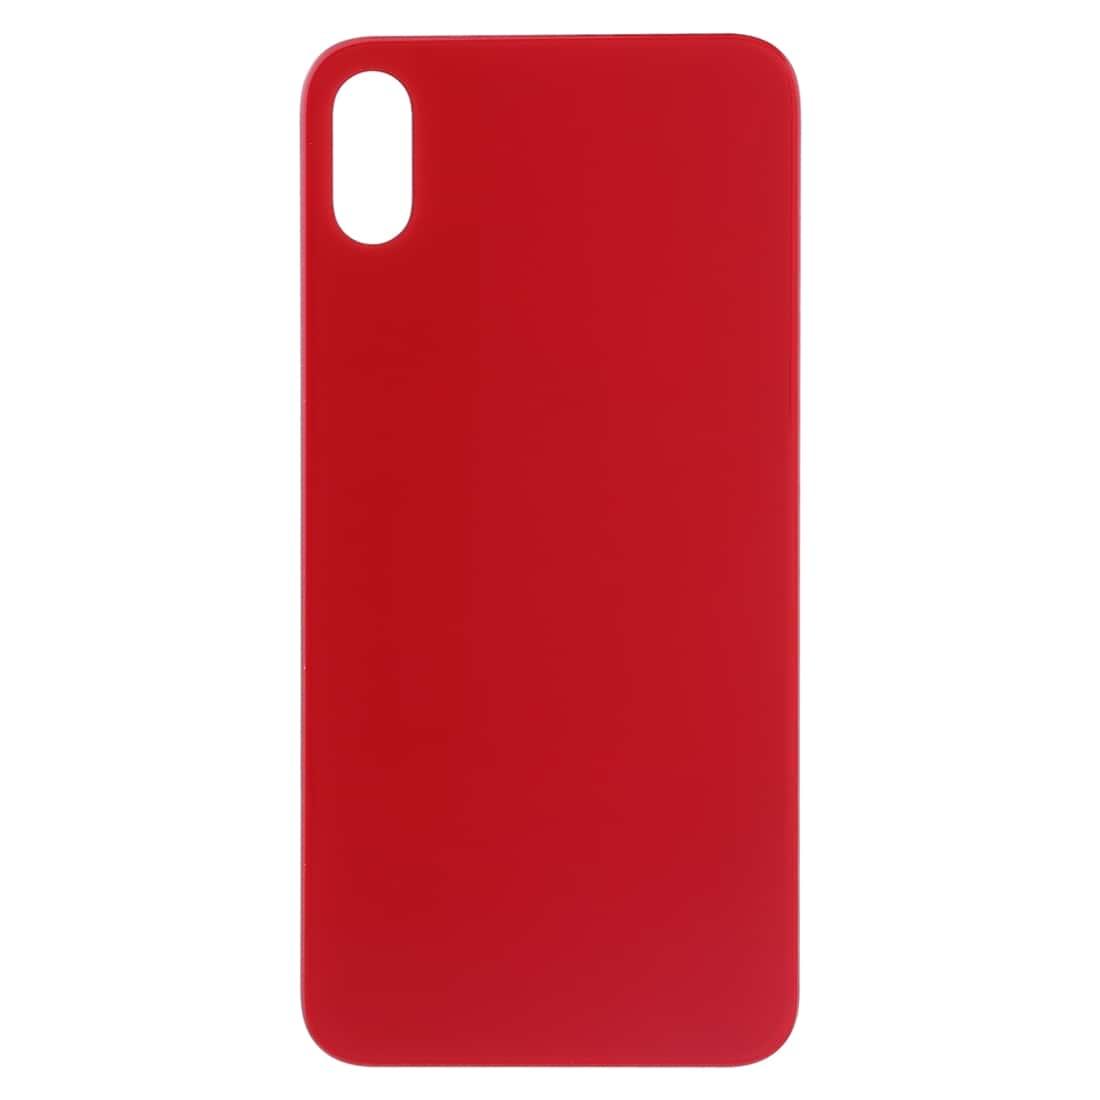 Back Glass Panel for  iPhone XS Max Red